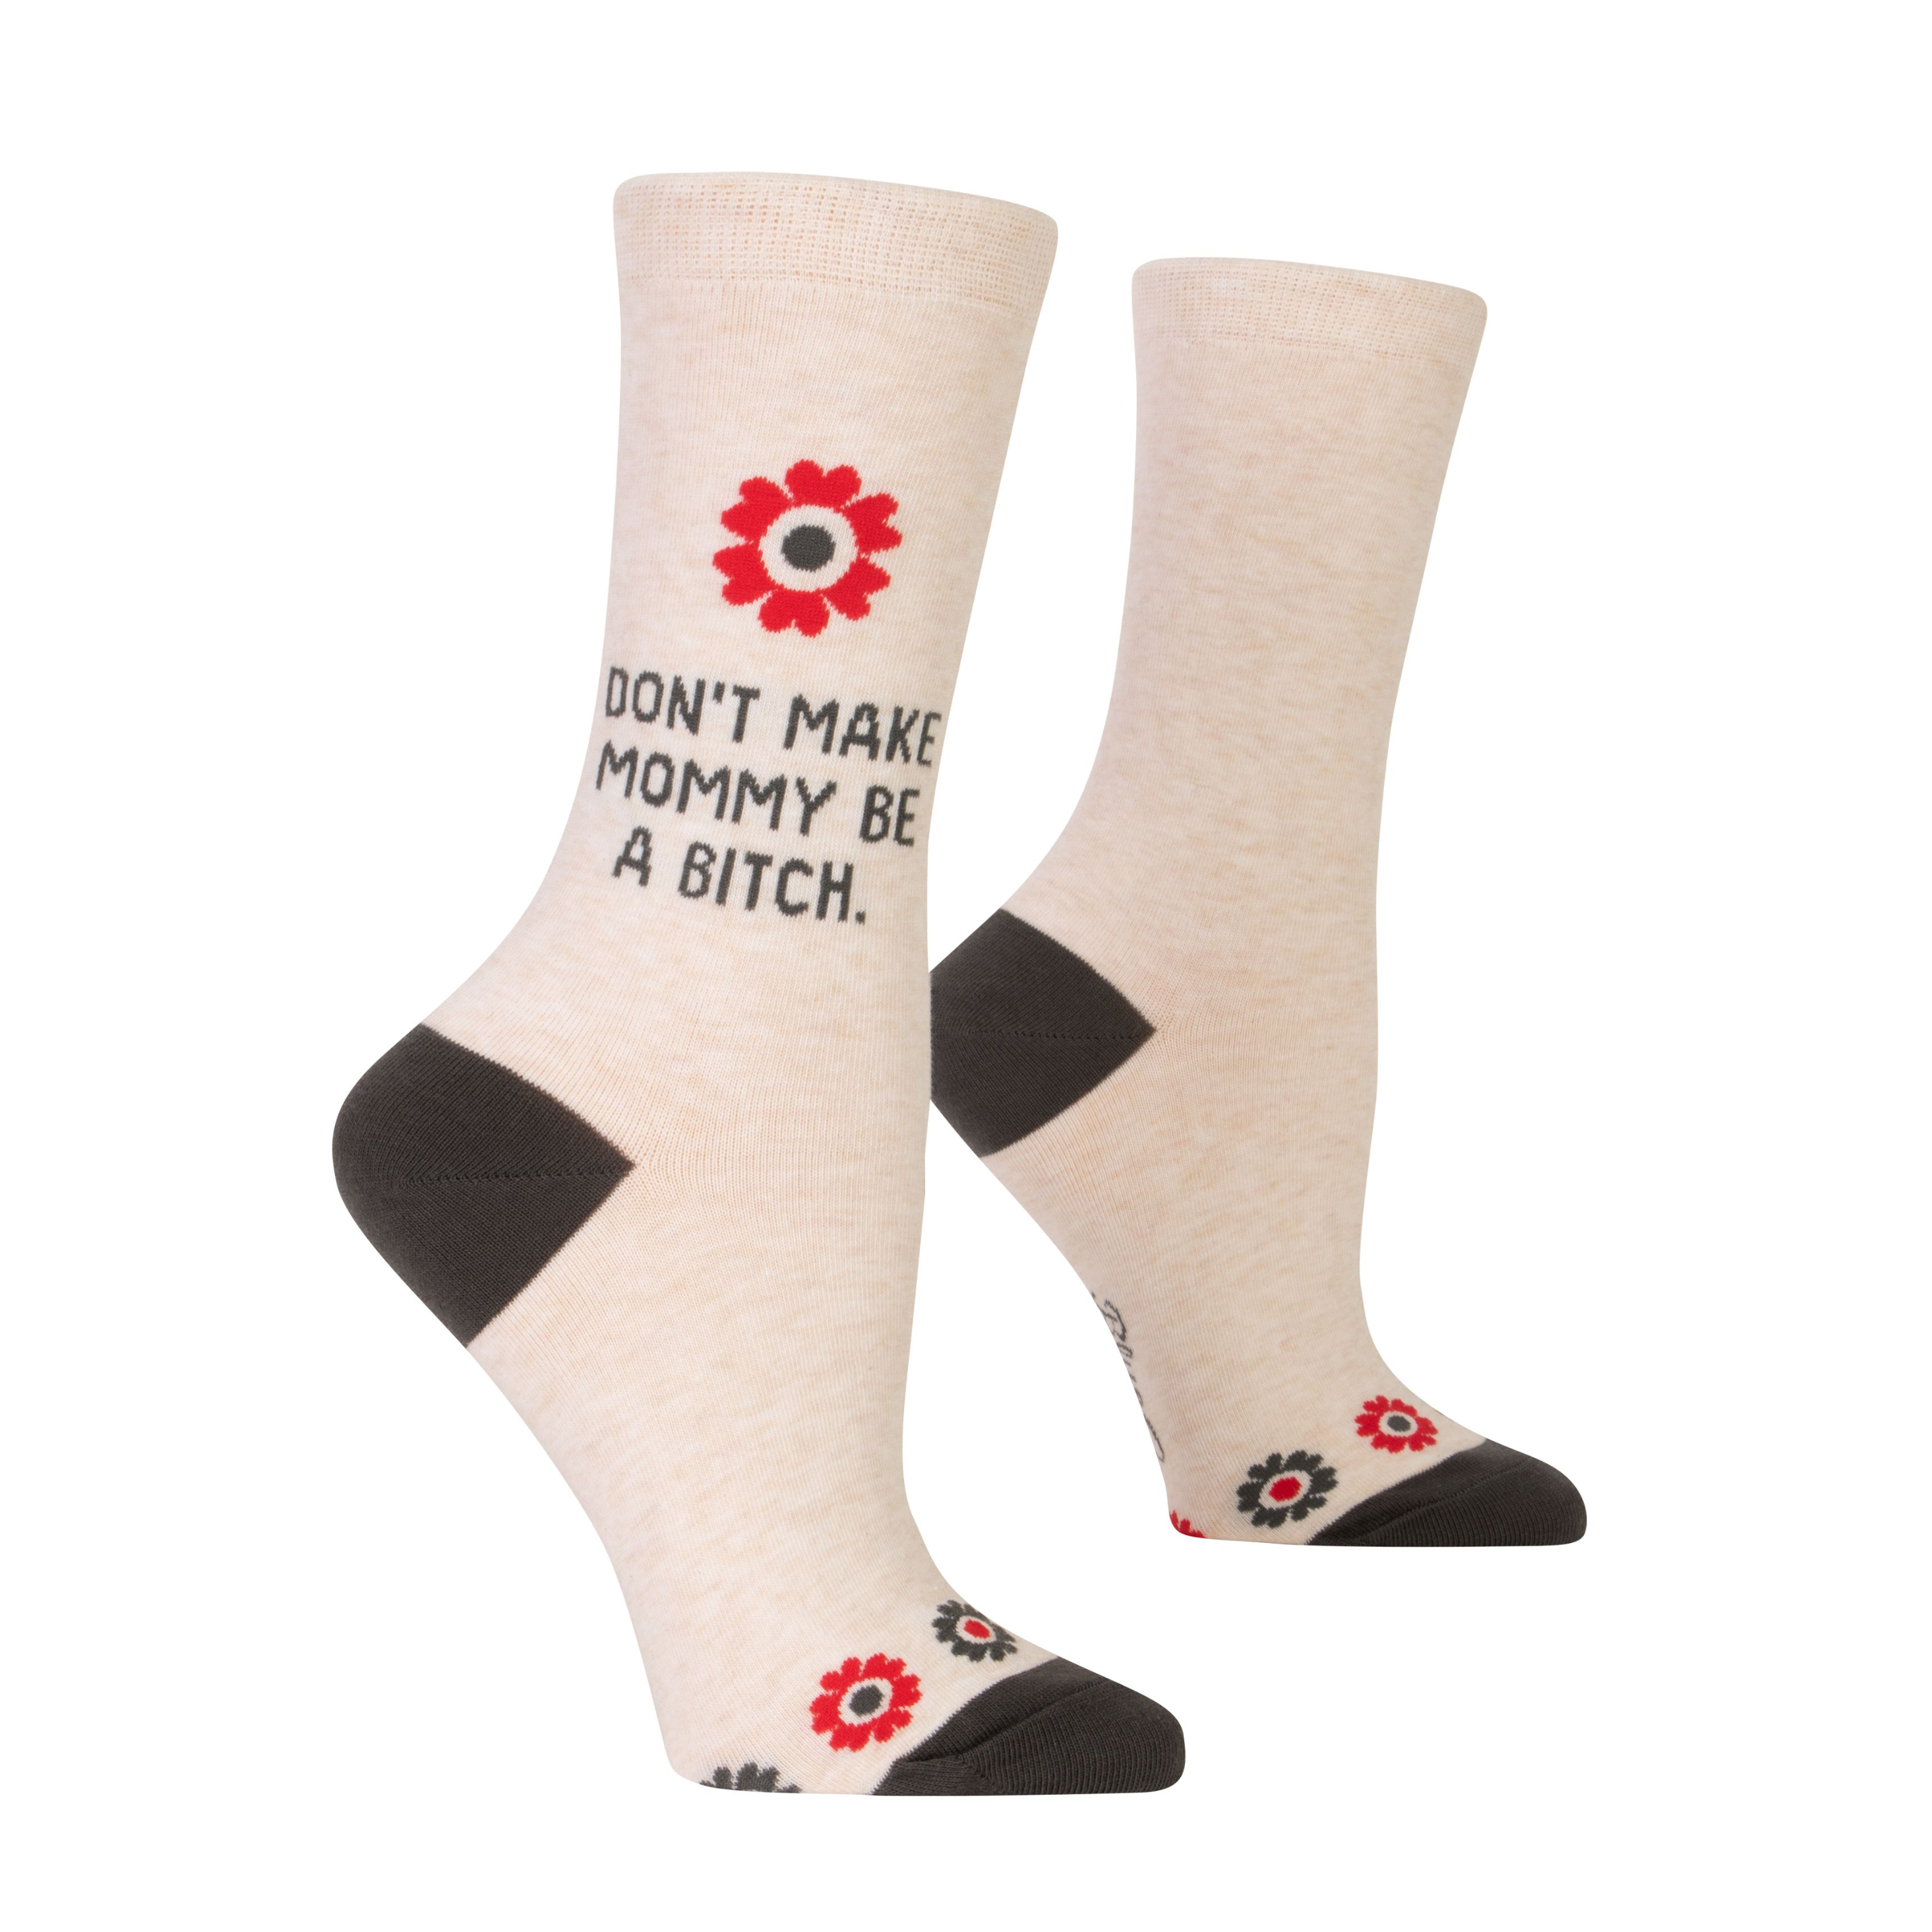 cream socks with brown toe and heel red flower on ankle and below it says don't make mommy be a bitch